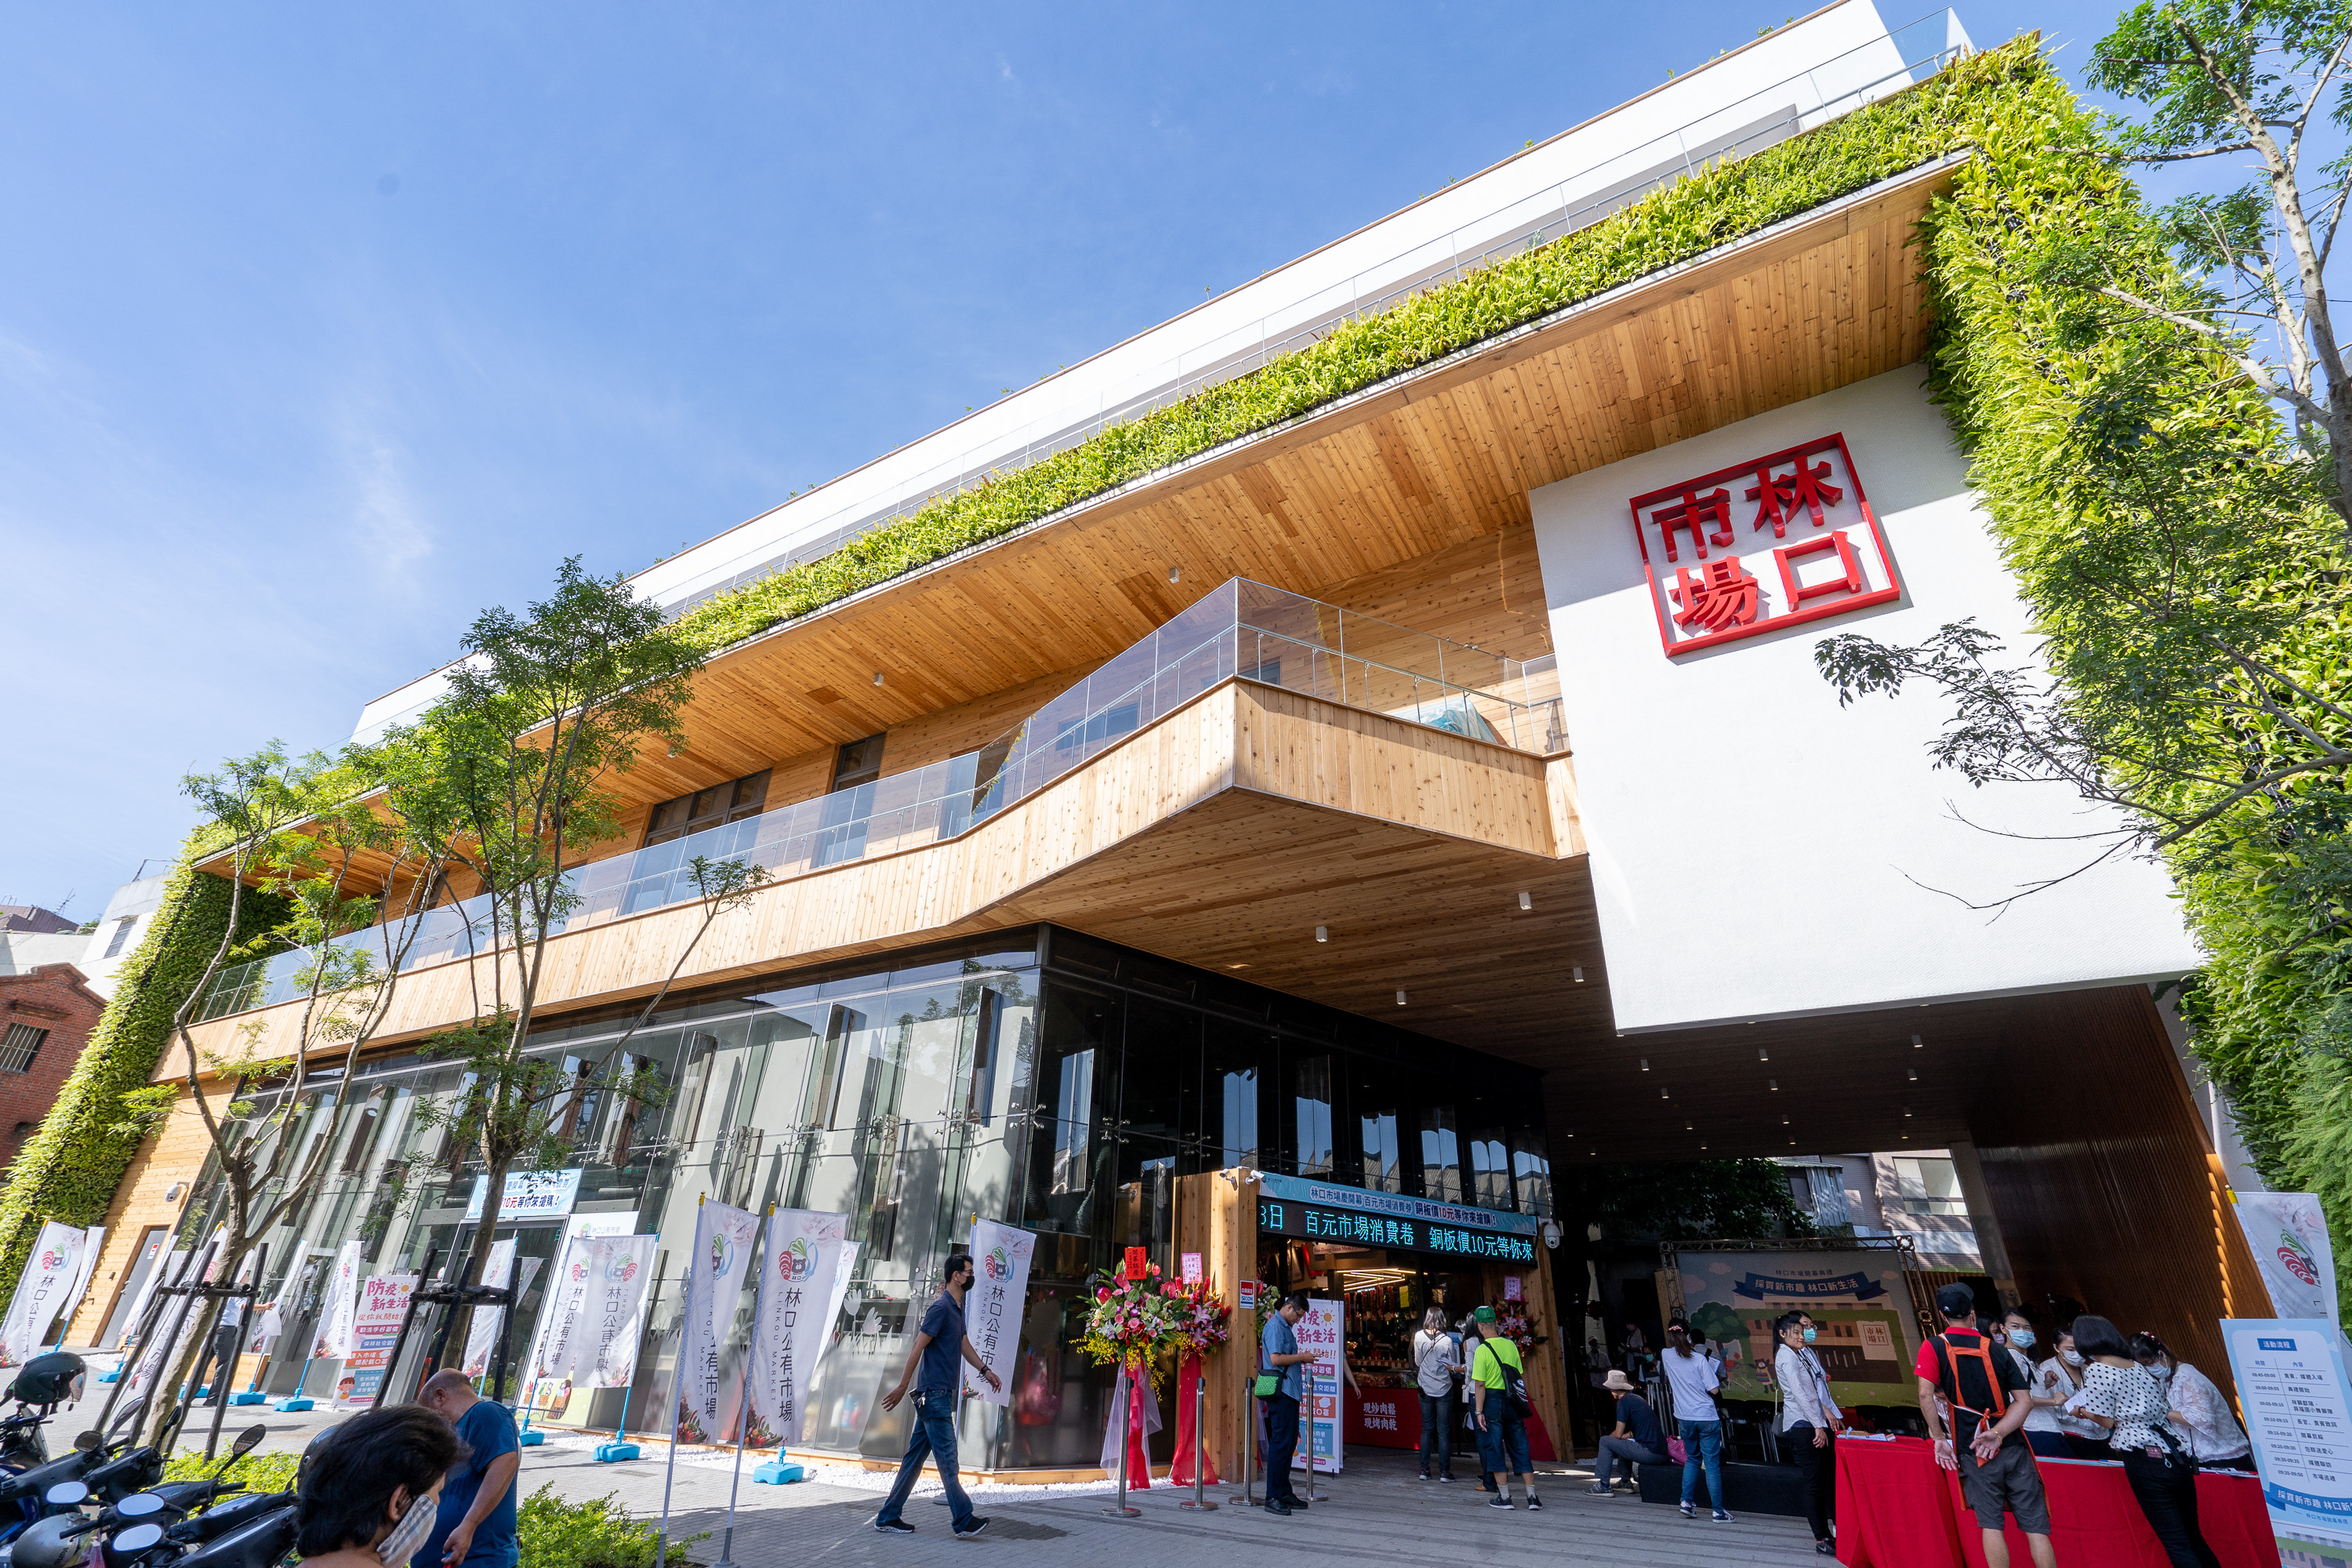 Public market renovated to create safe and hygienic shopping environments